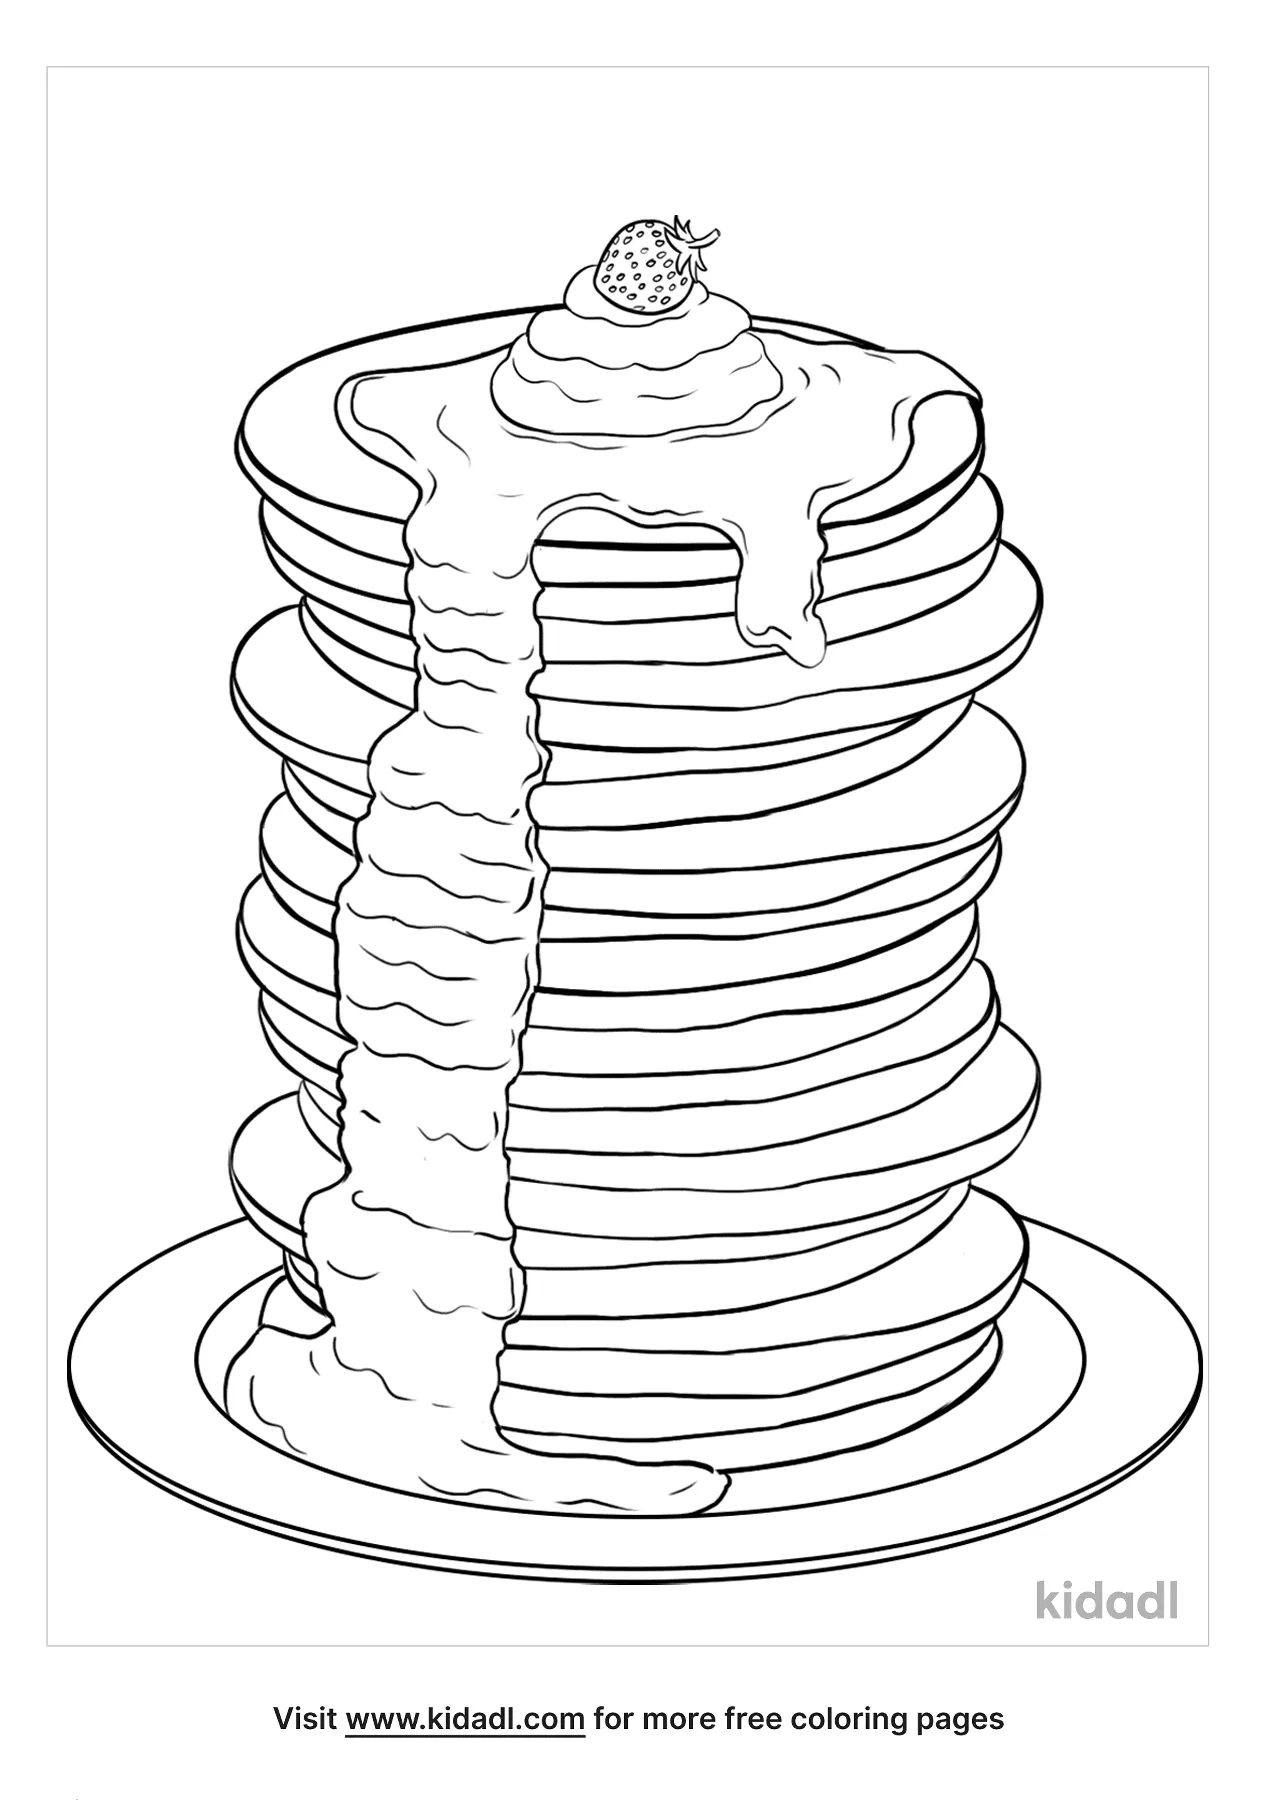 Pancake Coloring Pages   Free Food and drinks Coloring Pages   Kidadl